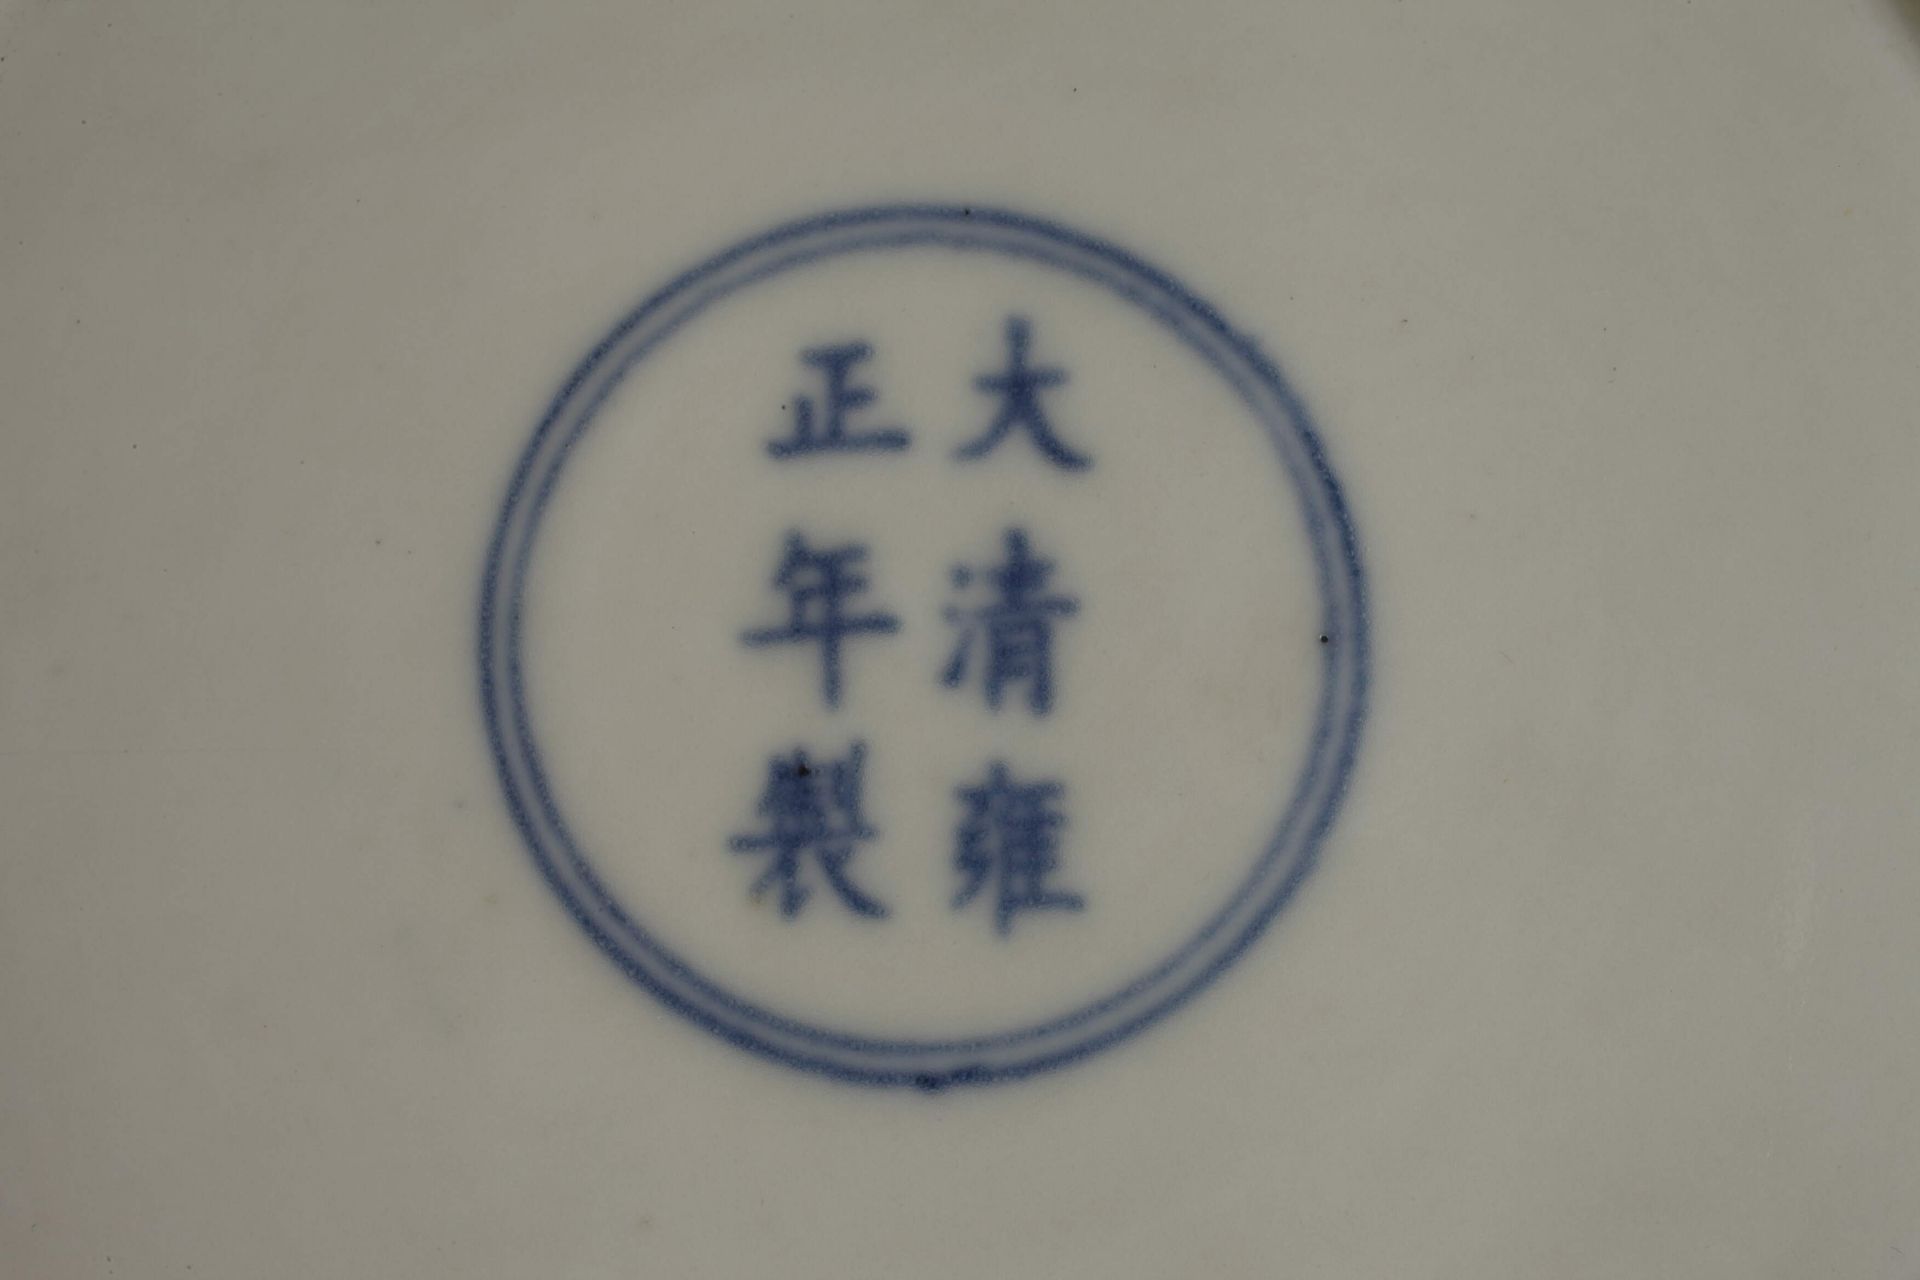 Decorative plate - Image 5 of 5